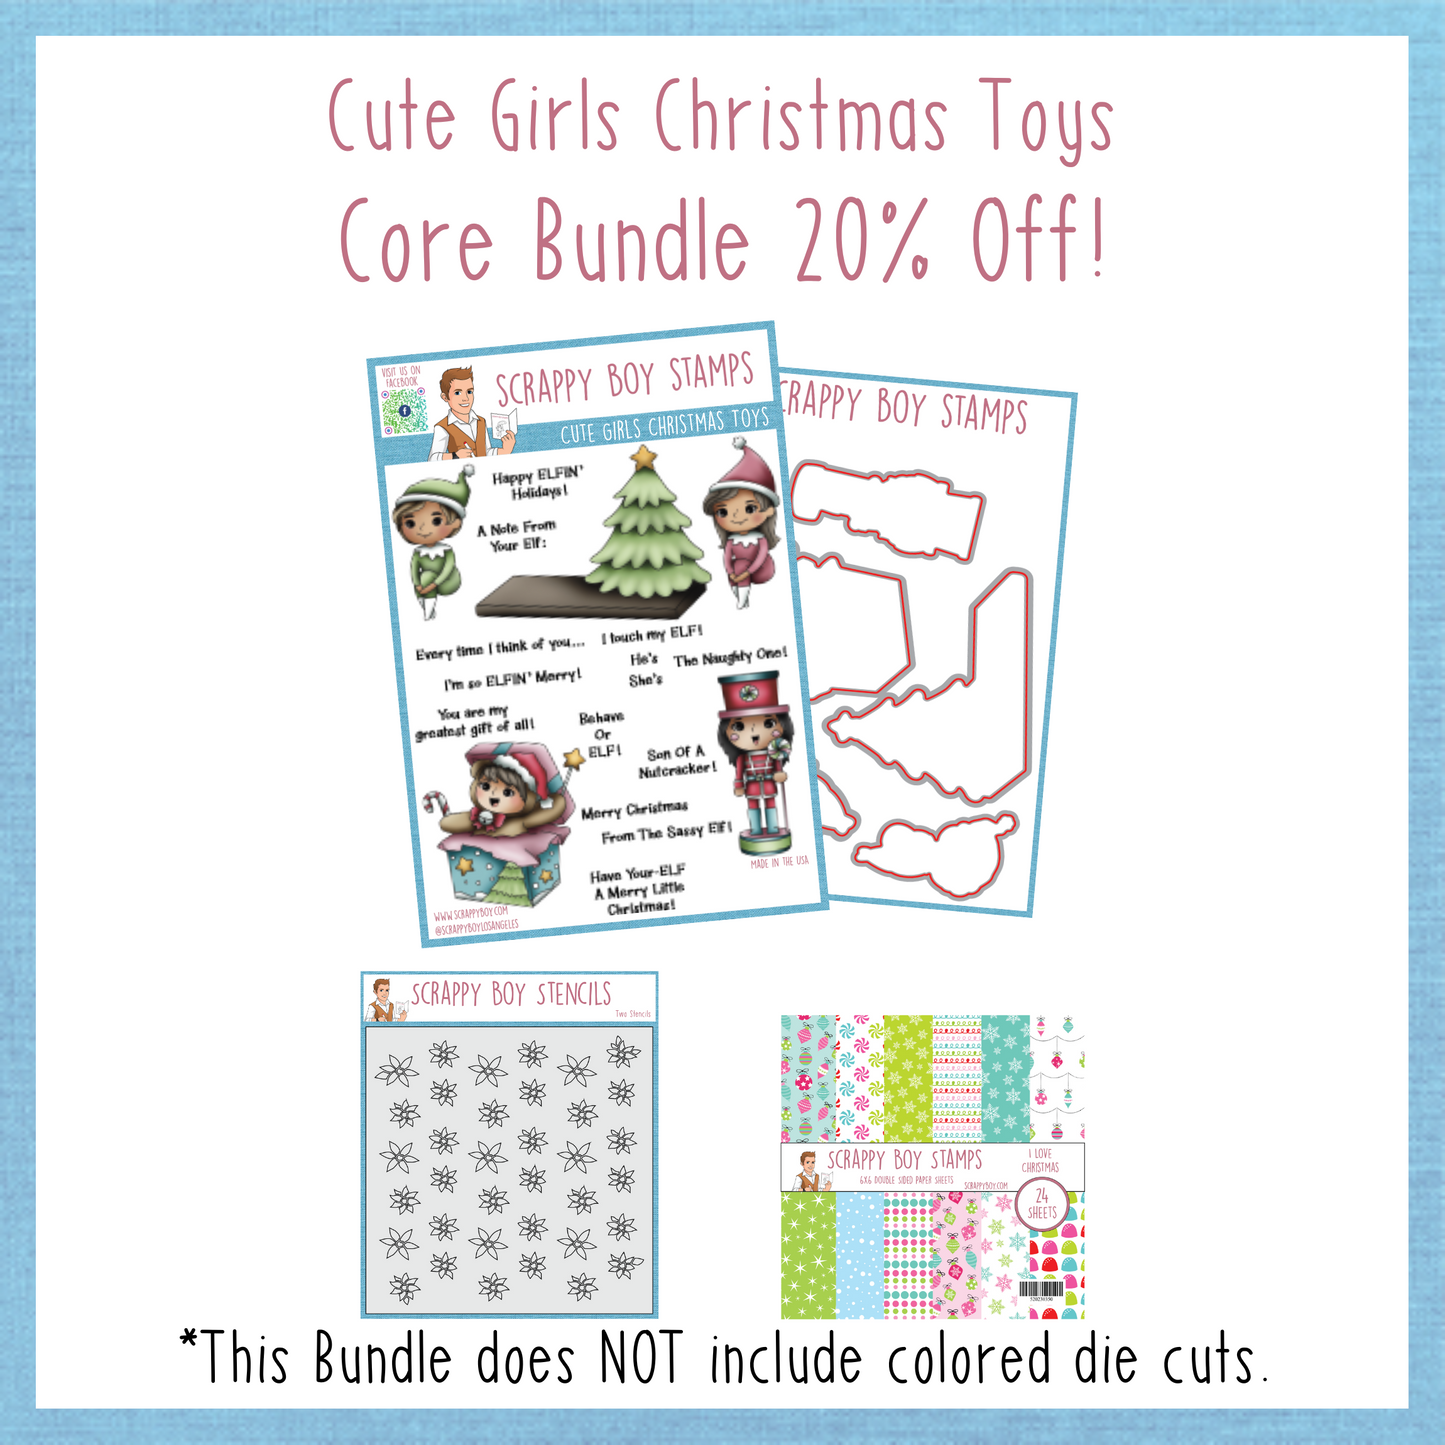 Core Bundle - Cute Girls Christmas Toys Release Scrappy Boy Stamps